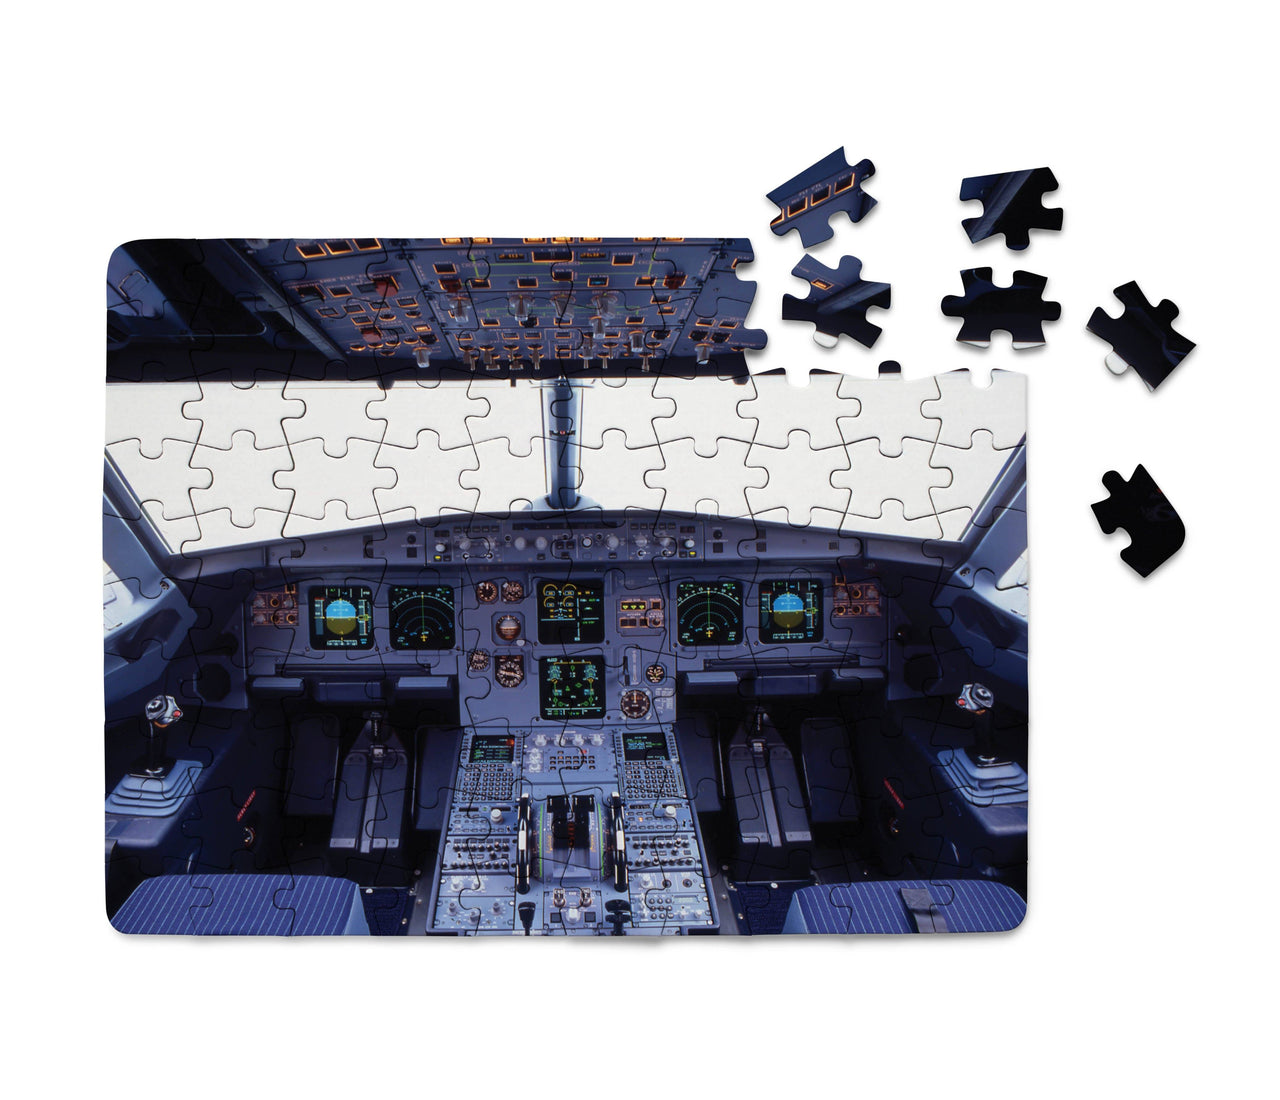 Airbus A320 Cockpit (Wide) Printed Puzzles Aviation Shop 